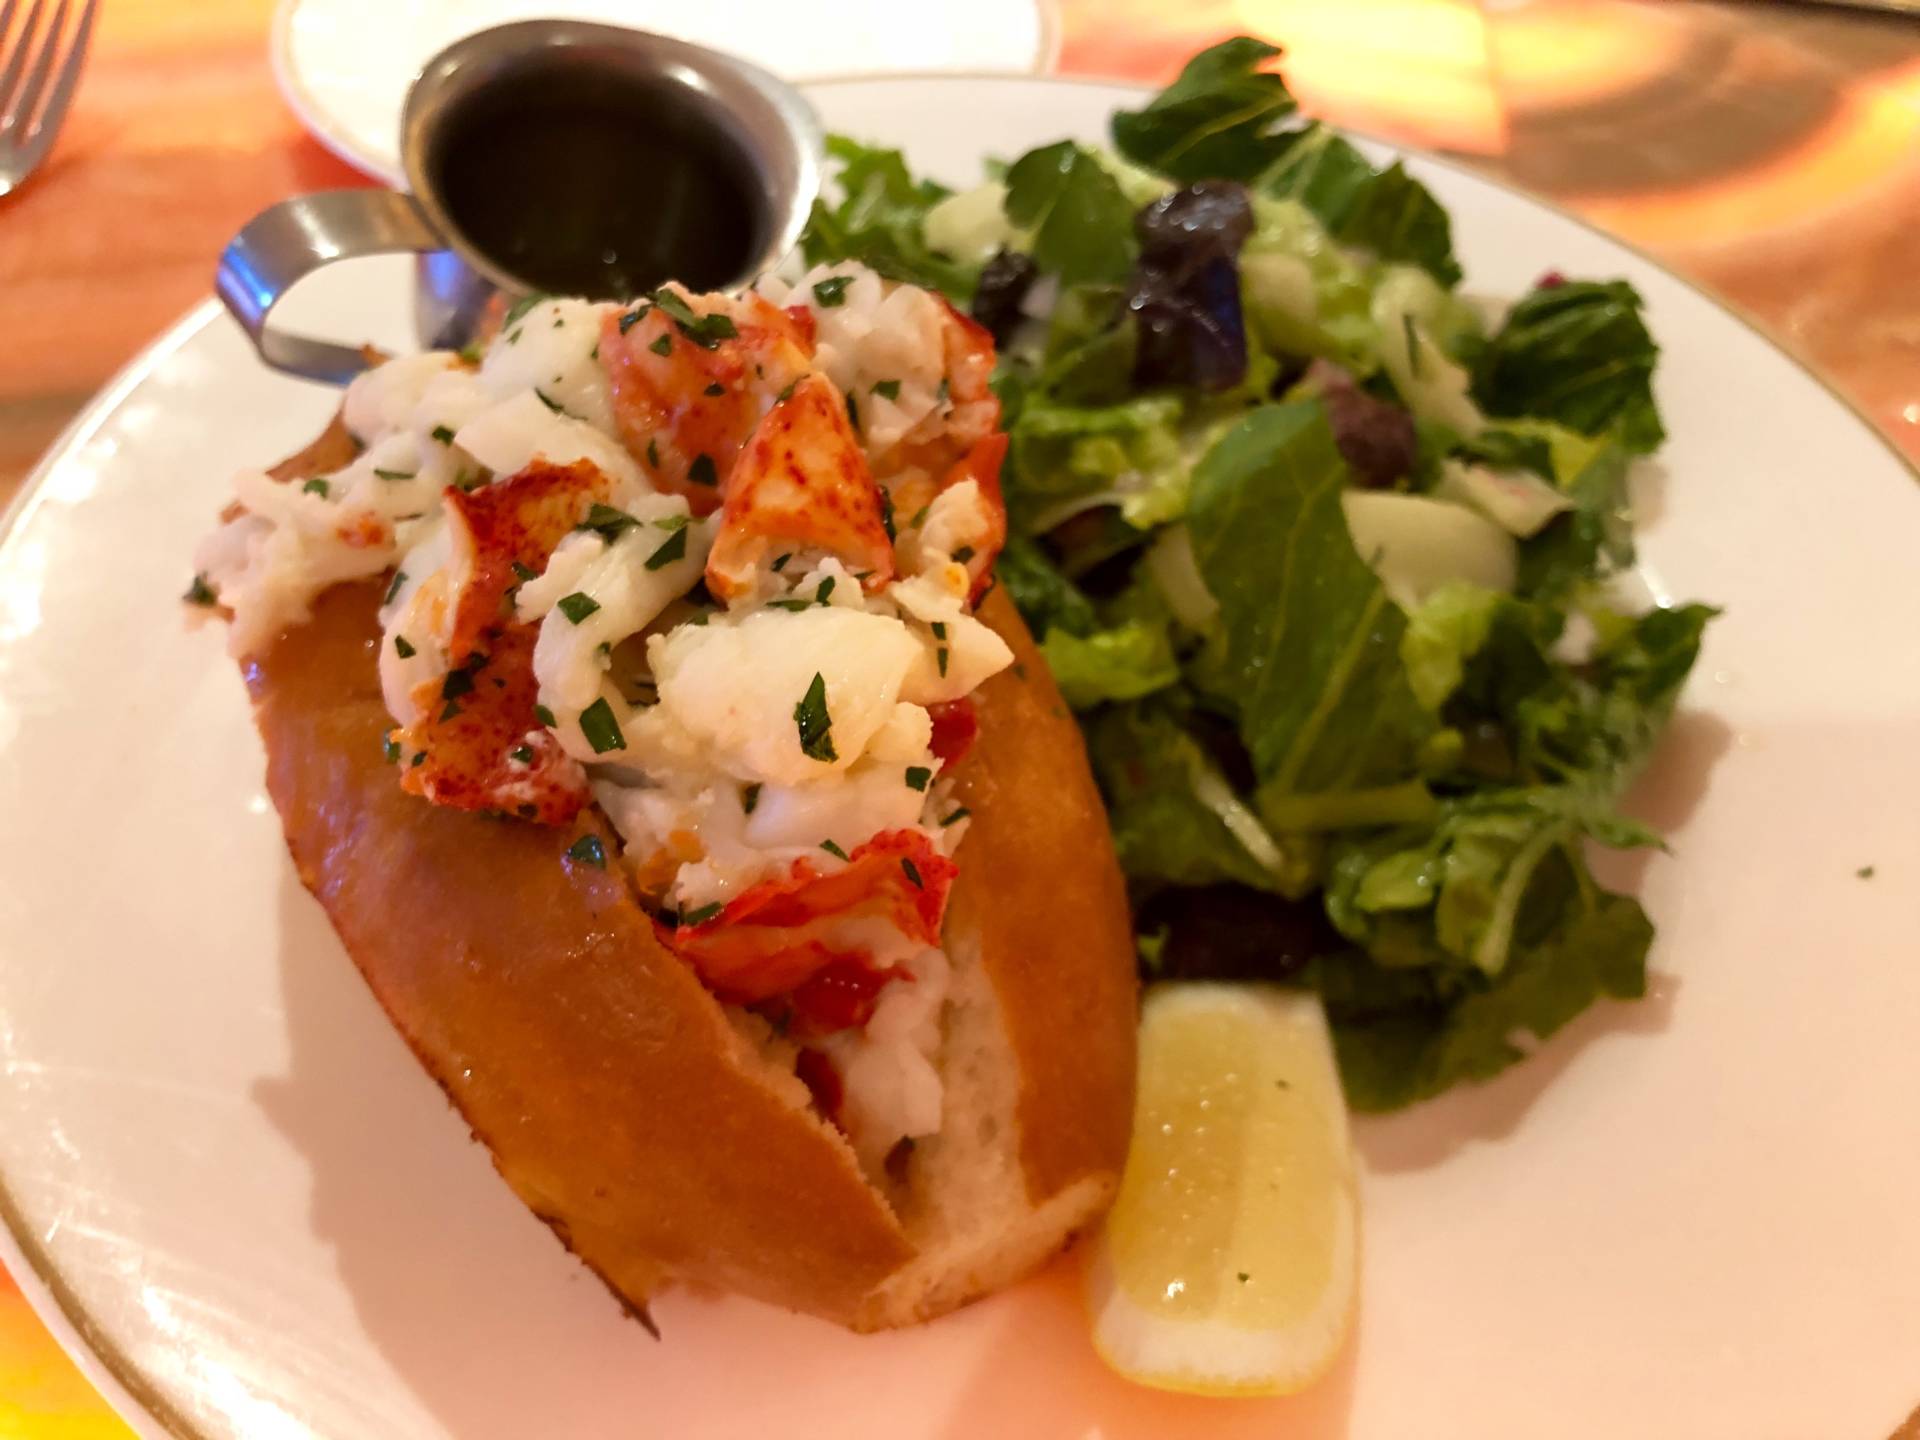 Maine lobster roll at Leo's Oyster Bar